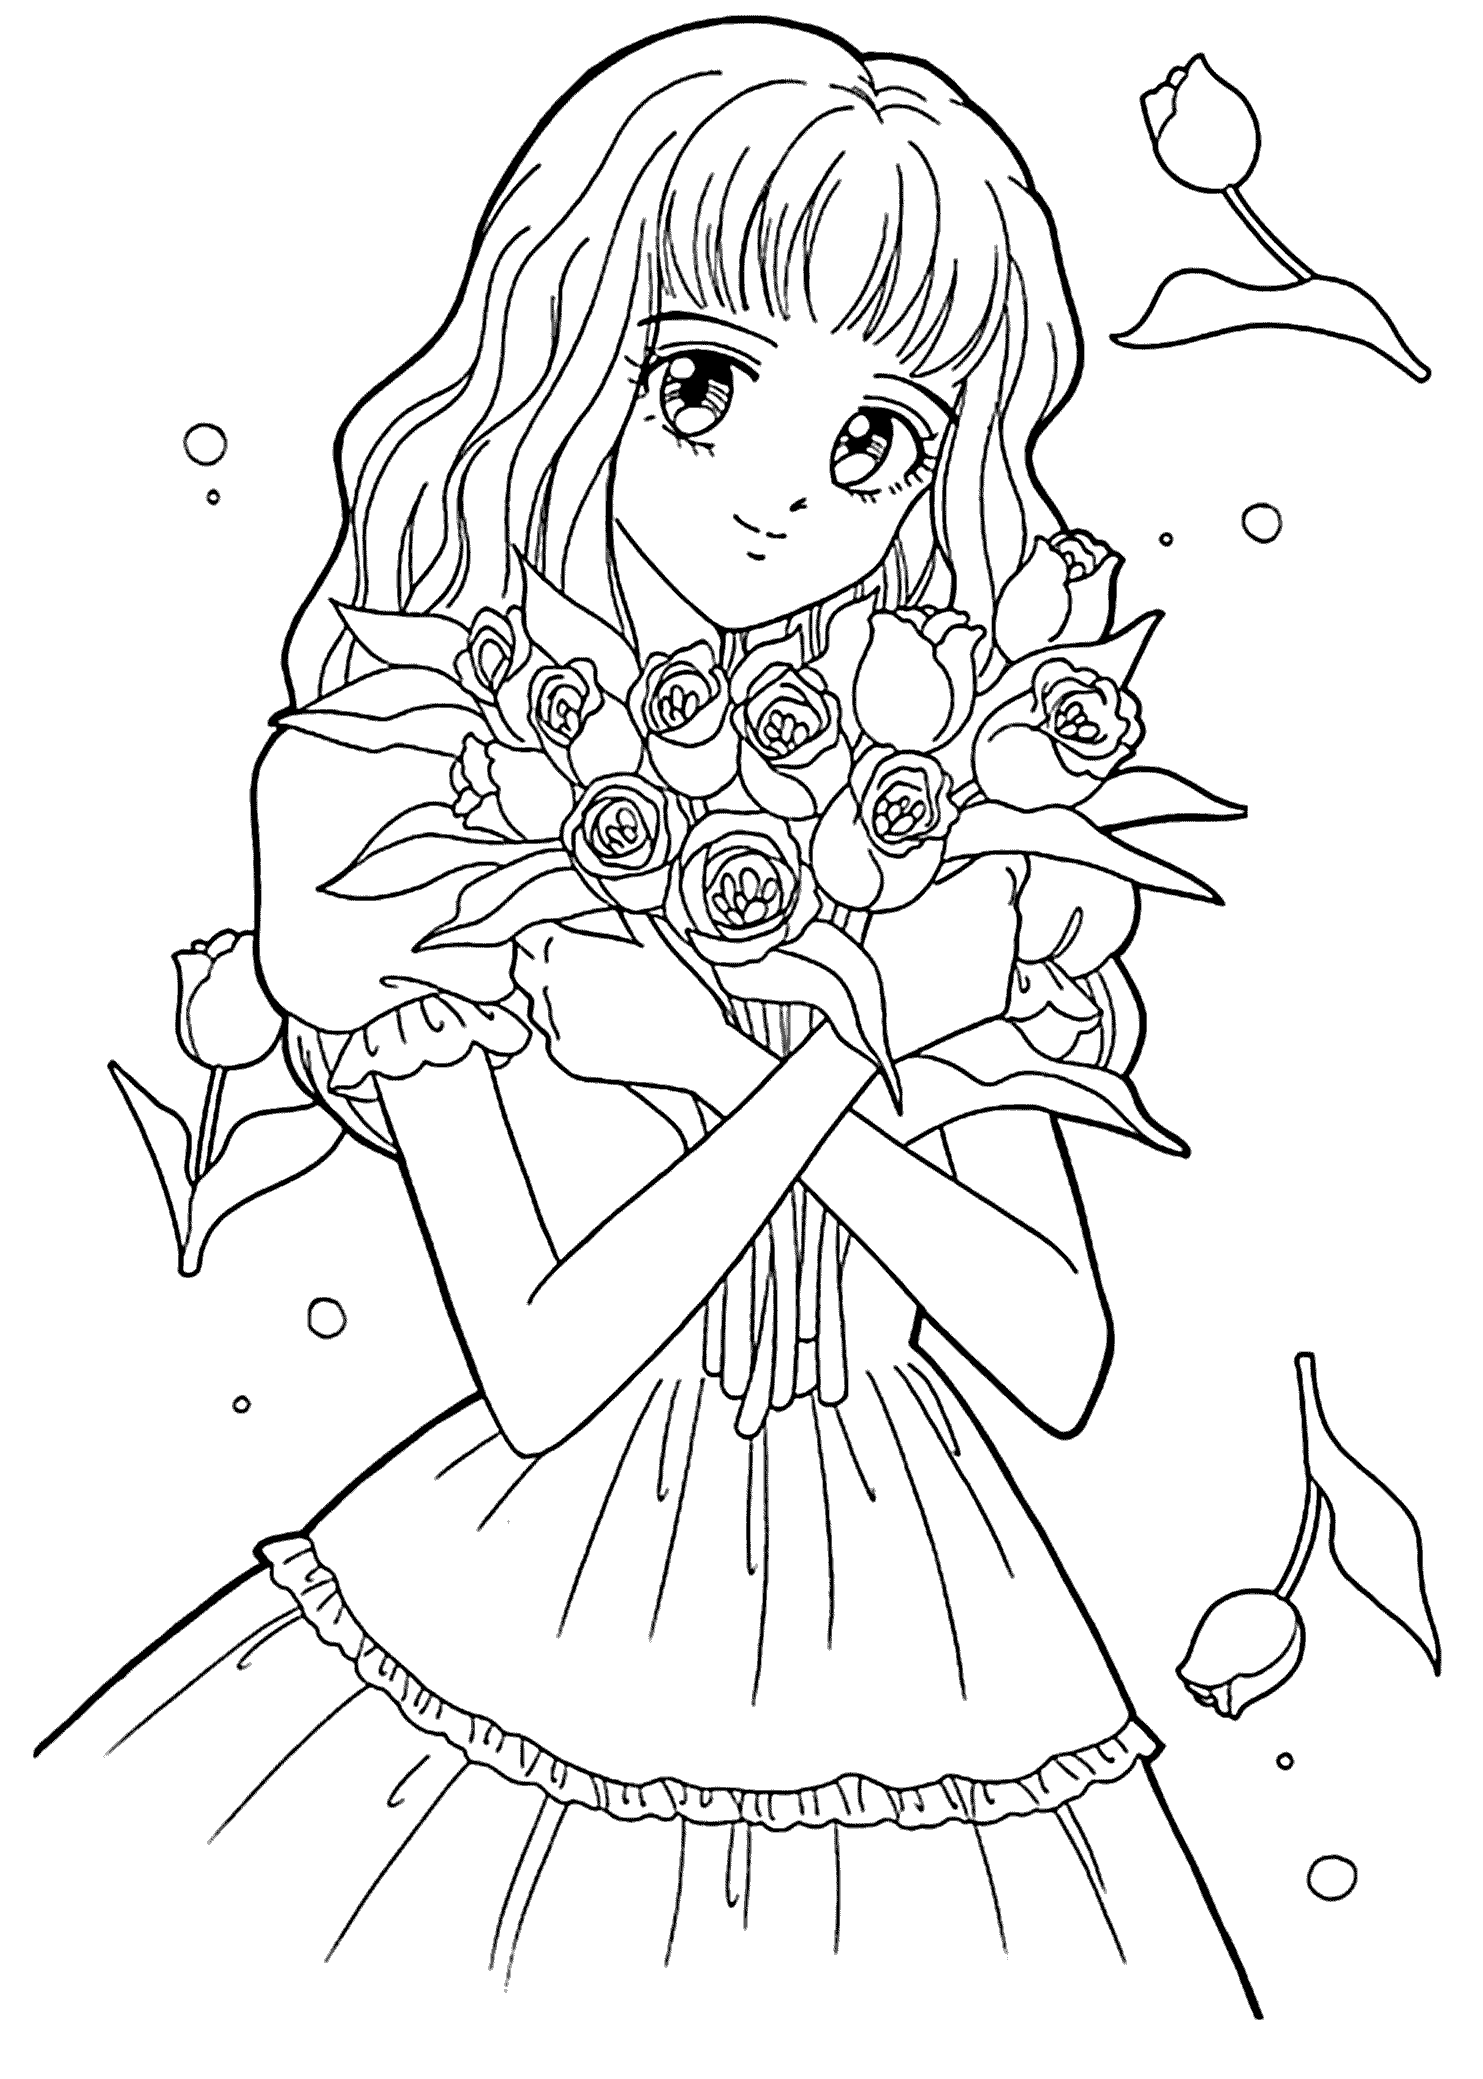 picture of a girl to color boy girl coloring page boys and girls wear colouring pages girl of to picture color a 